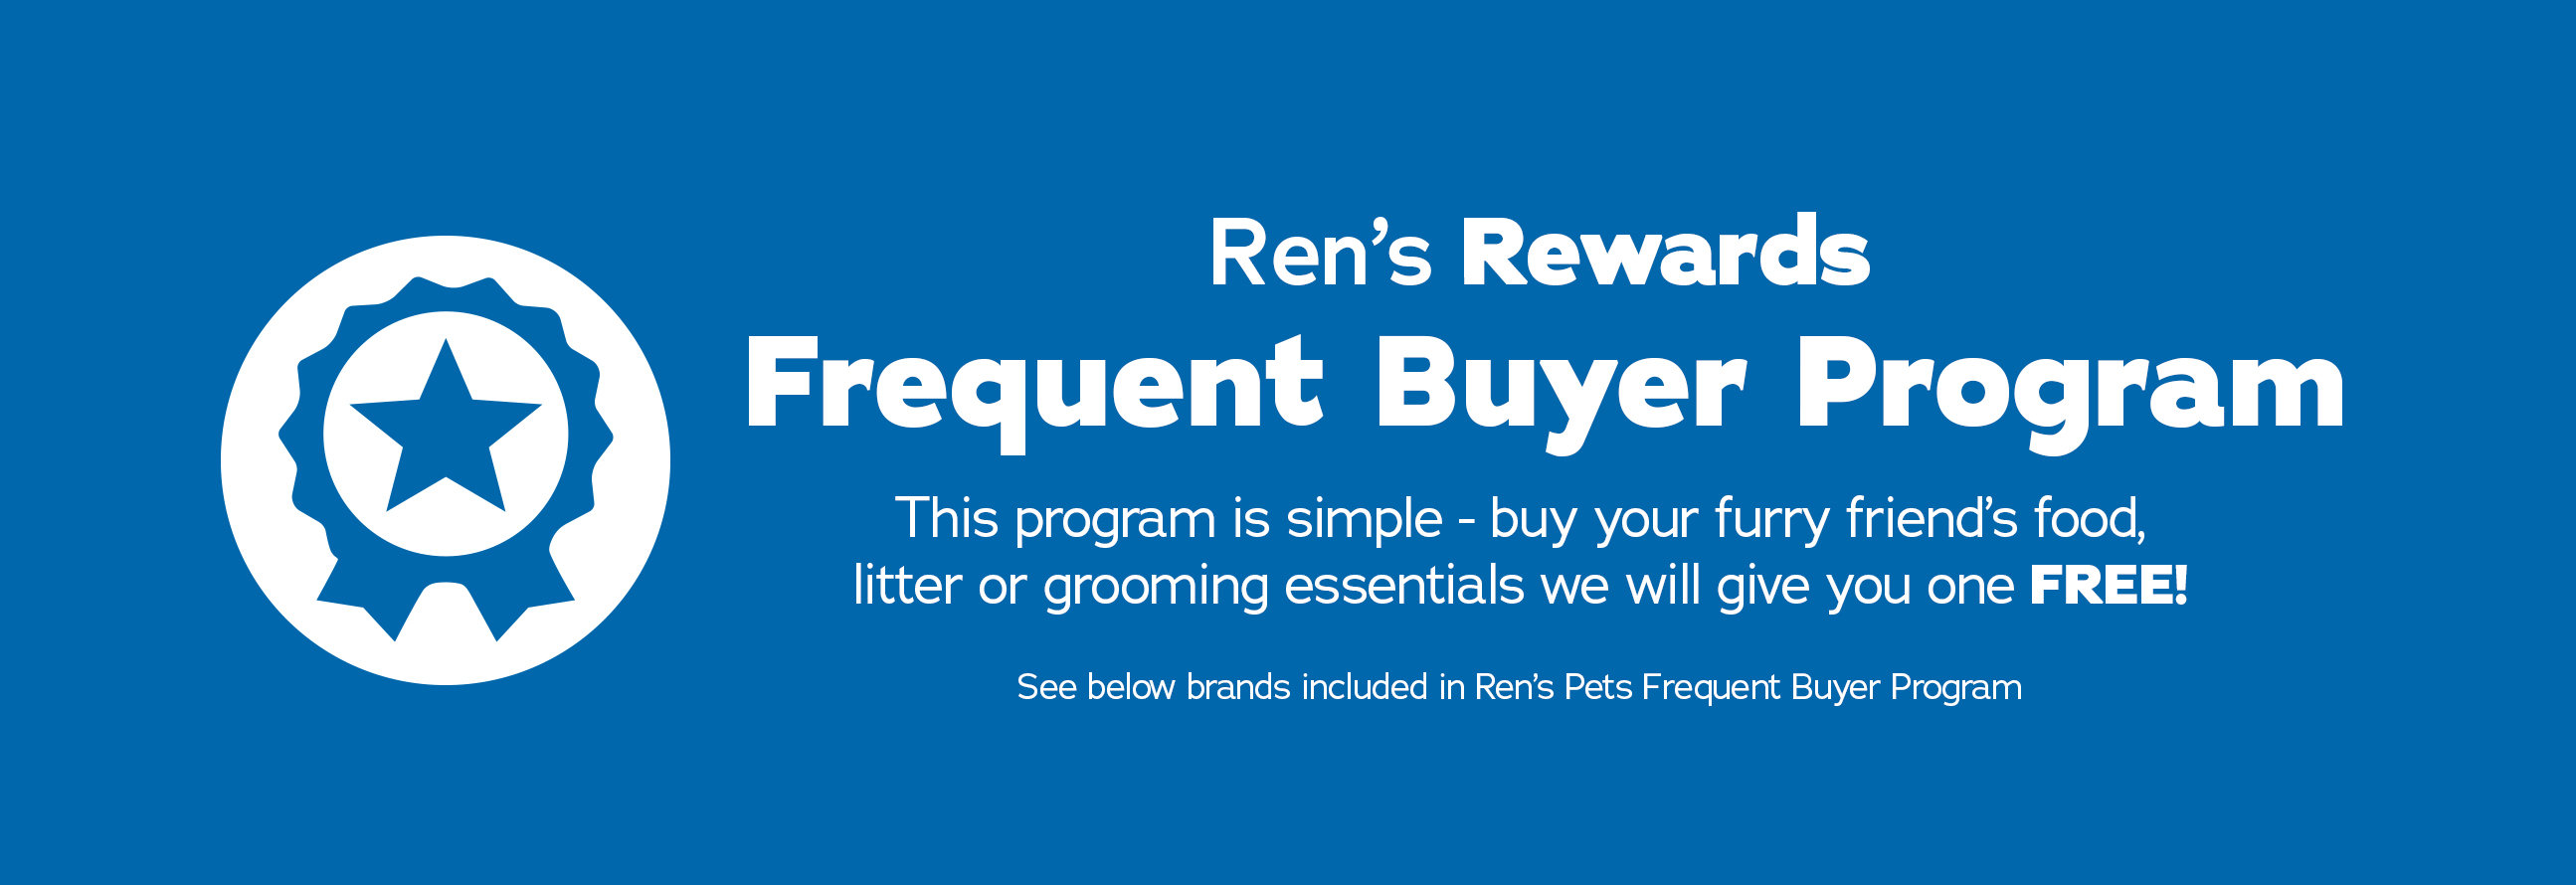 Ren's Rewards Frequent Buyer Program. This program is simple - buy your furry friends food, litter or grooming essentials and we will give you one FREE! See below brands included in Ren's Pets Frequent Buyer Program